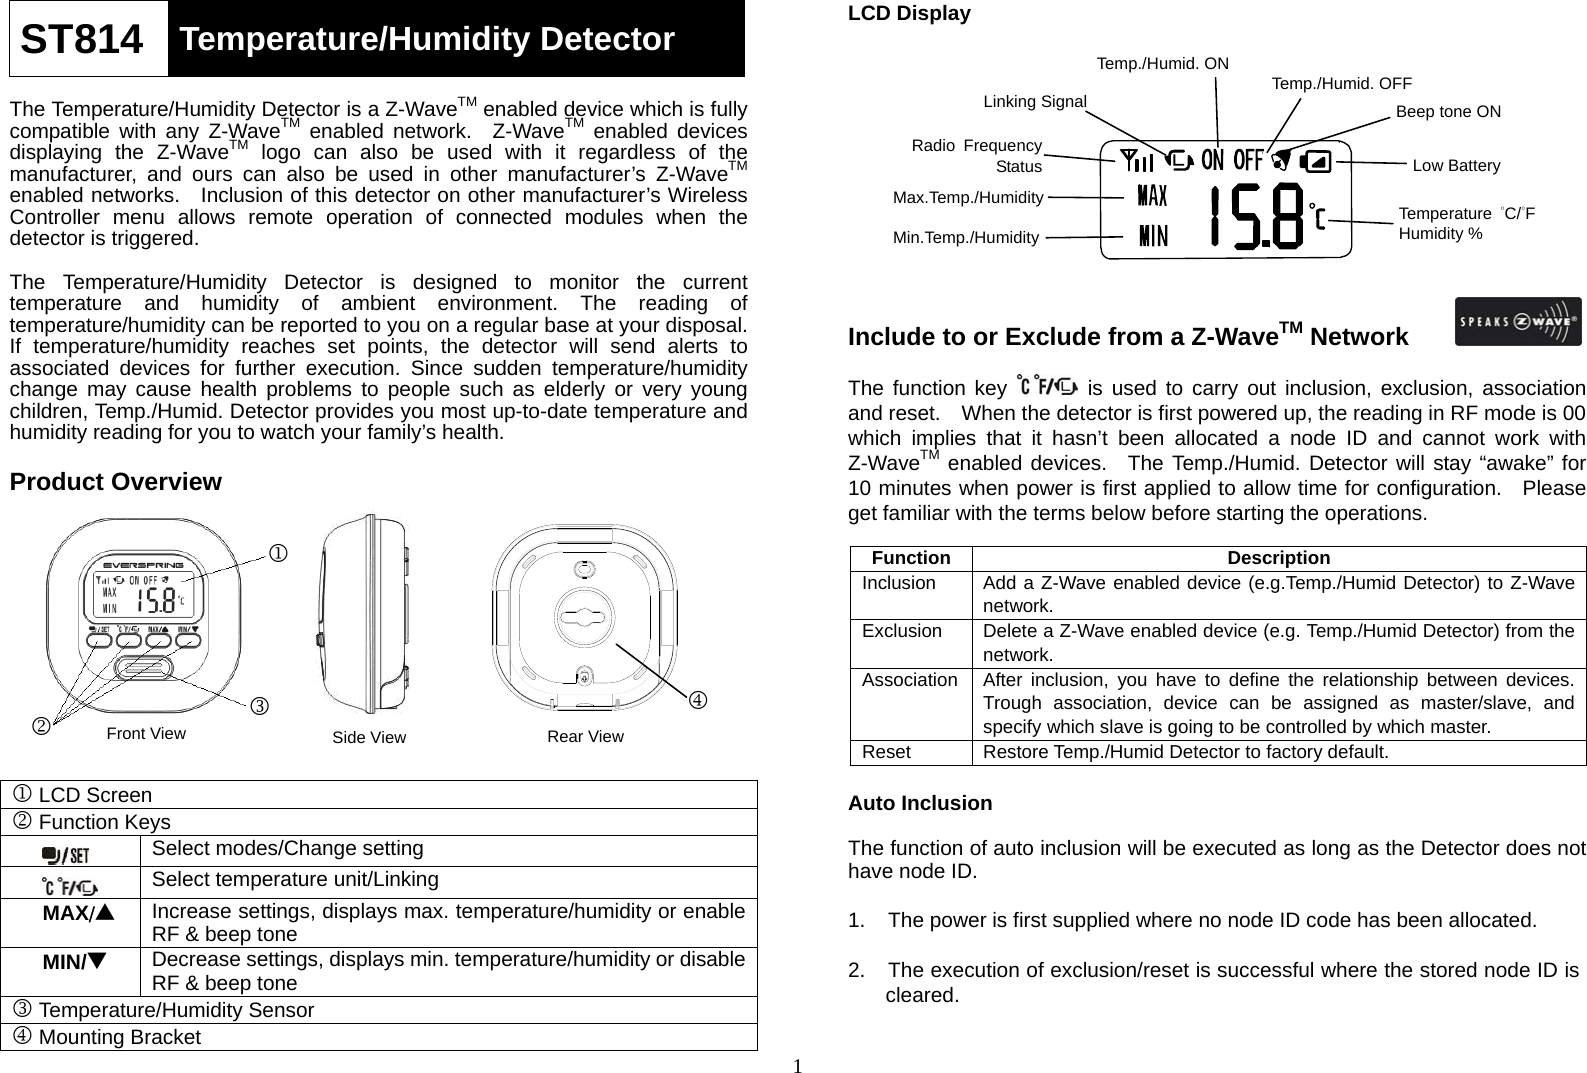  1ST814  Temperature/Humidity Detector  The Temperature/Humidity Detector is a Z-WaveTM enabled device which is fully compatible with any Z-WaveTM enabled network.  Z-WaveTM enabled devices displaying the Z-WaveTM logo can also be used with it regardless of the manufacturer, and ours can also be used in other manufacturer’s Z-WaveTM enabled networks.  Inclusion of this detector on other manufacturer’s Wireless Controller menu allows remote operation of connected modules when the detector is triggered.   The Temperature/Humidity Detector is designed to monitor the current temperature and humidity of ambient environment. The reading of temperature/humidity can be reported to you on a regular base at your disposal.   If temperature/humidity reaches set points, the detector will send alerts to associated devices for further execution. Since sudden temperature/humidity change may cause health problems to people such as elderly or very young children, Temp./Humid. Detector provides you most up-to-date temperature and humidity reading for you to watch your family’s health.    Product Overview                  1 LCD Screen 2 Function Keys  Select modes/Change setting  Select temperature unit/LinkingMAX/▲ Increase settings, displays max. temperature/humidity or enable RF &amp; beep tone MIN/▼ Decrease settings, displays min. temperature/humidity or disable RF &amp; beep tone 3 Temperature/Humidity Sensor 4 Mounting Bracket LCD Display             Include to or Exclude from a Z-WaveTM Network  The function key   is used to carry out inclusion, exclusion, association and reset.    When the detector is first powered up, the reading in RF mode is 00 which implies that it hasn’t been allocated a node ID and cannot work with Z-WaveTM enabled devices.  The Temp./Humid. Detector will stay “awake” for 10 minutes when power is first applied to allow time for configuration.   Please get familiar with the terms below before starting the operations.      Function Description Inclusion   Add a Z-Wave enabled device (e.g.Temp./Humid Detector) to Z-Wave network. Exclusion   Delete a Z-Wave enabled device (e.g. Temp./Humid Detector) from the network. Association  After inclusion, you have to define the relationship between devices. Trough association, device can be assigned as master/slave, and specify which slave is going to be controlled by which master. Reset Restore Temp./Humid Detector to factory default.  Auto Inclusion    The function of auto inclusion will be executed as long as the Detector does not have node ID.  1.    The power is first supplied where no node ID code has been allocated.  2.    The execution of exclusion/reset is successful where the stored node ID is     cleared.  123Front View Side View  RearViewBeep tone ON Min.Temp./HumidityMax.Temp./Humidity Temperature  °C/°F Humidity % Temp./Humid. OFFTemp./Humid. ON Linking SignalRadio Frequency Status  Low Battery 4